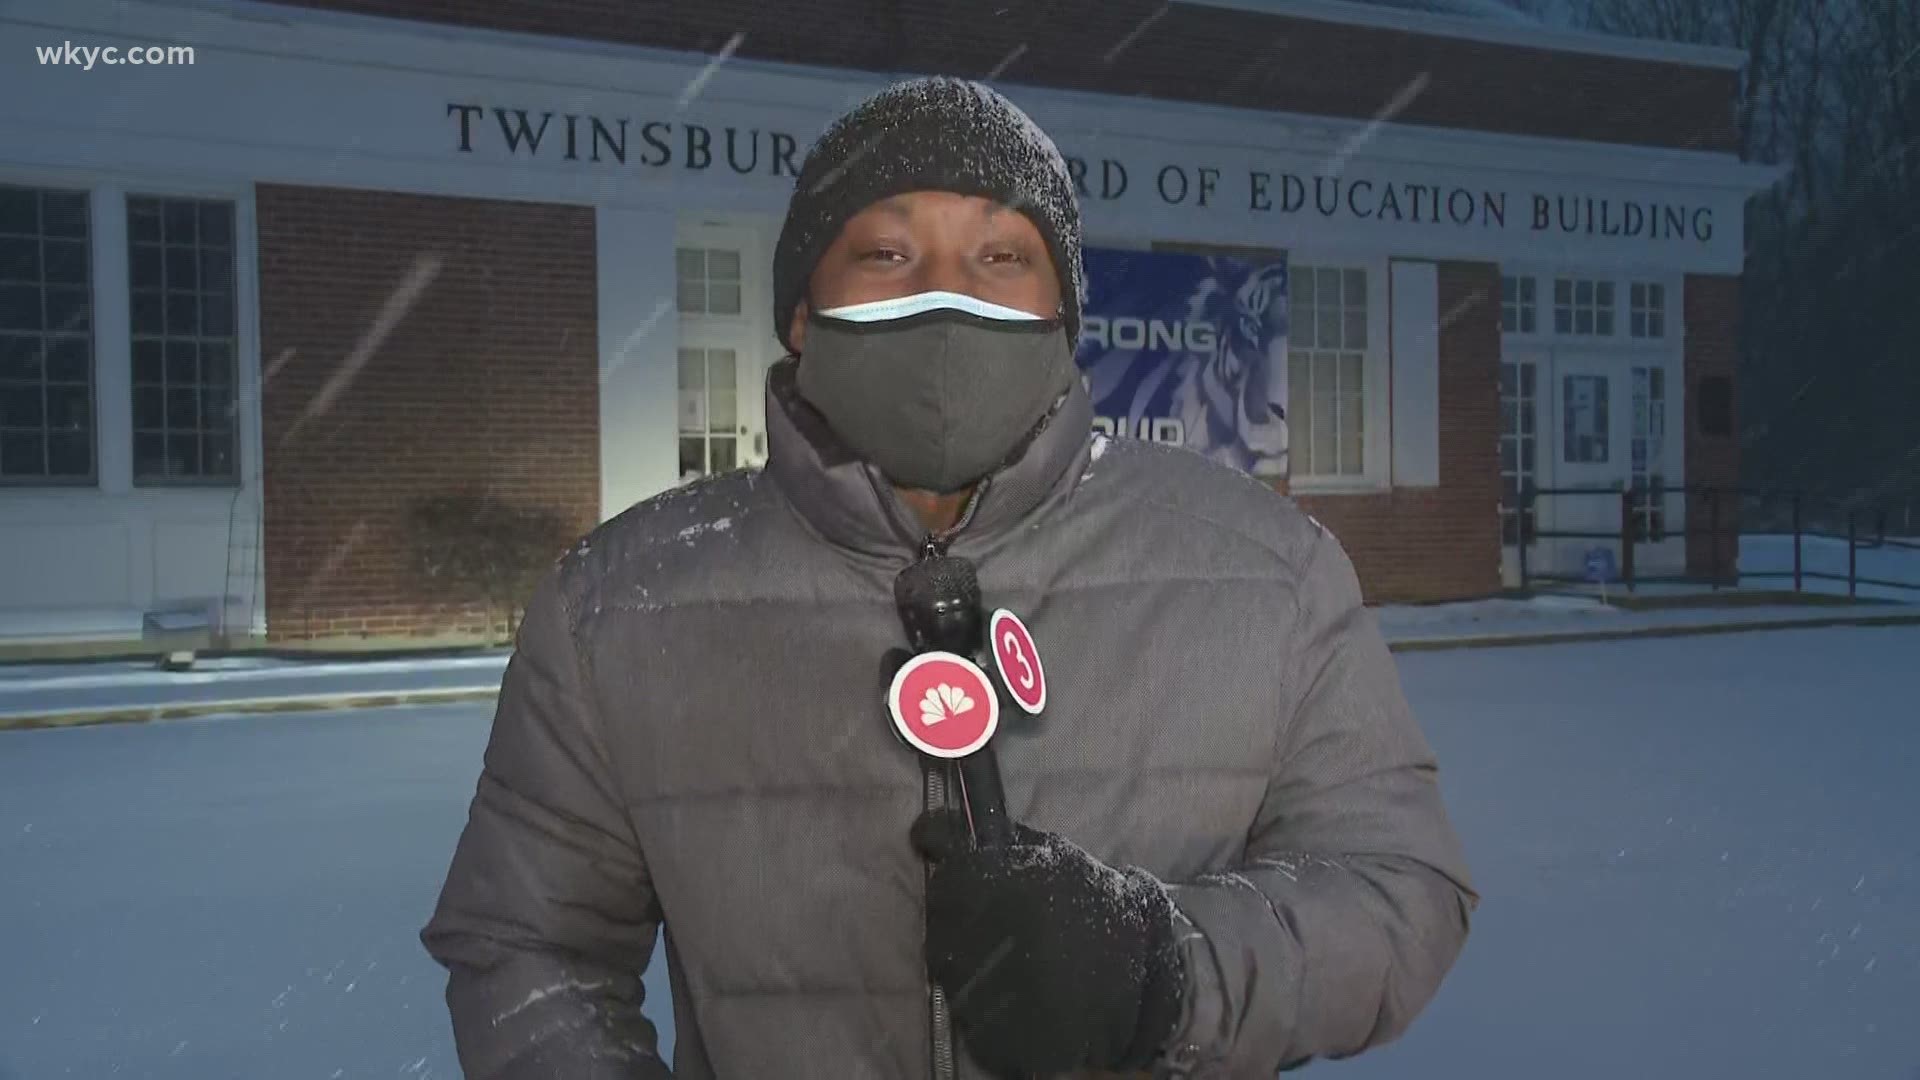 School are still planning to use their snow day even with virtual learning. 3News' Brandon Simmons has more details on the plan of action.